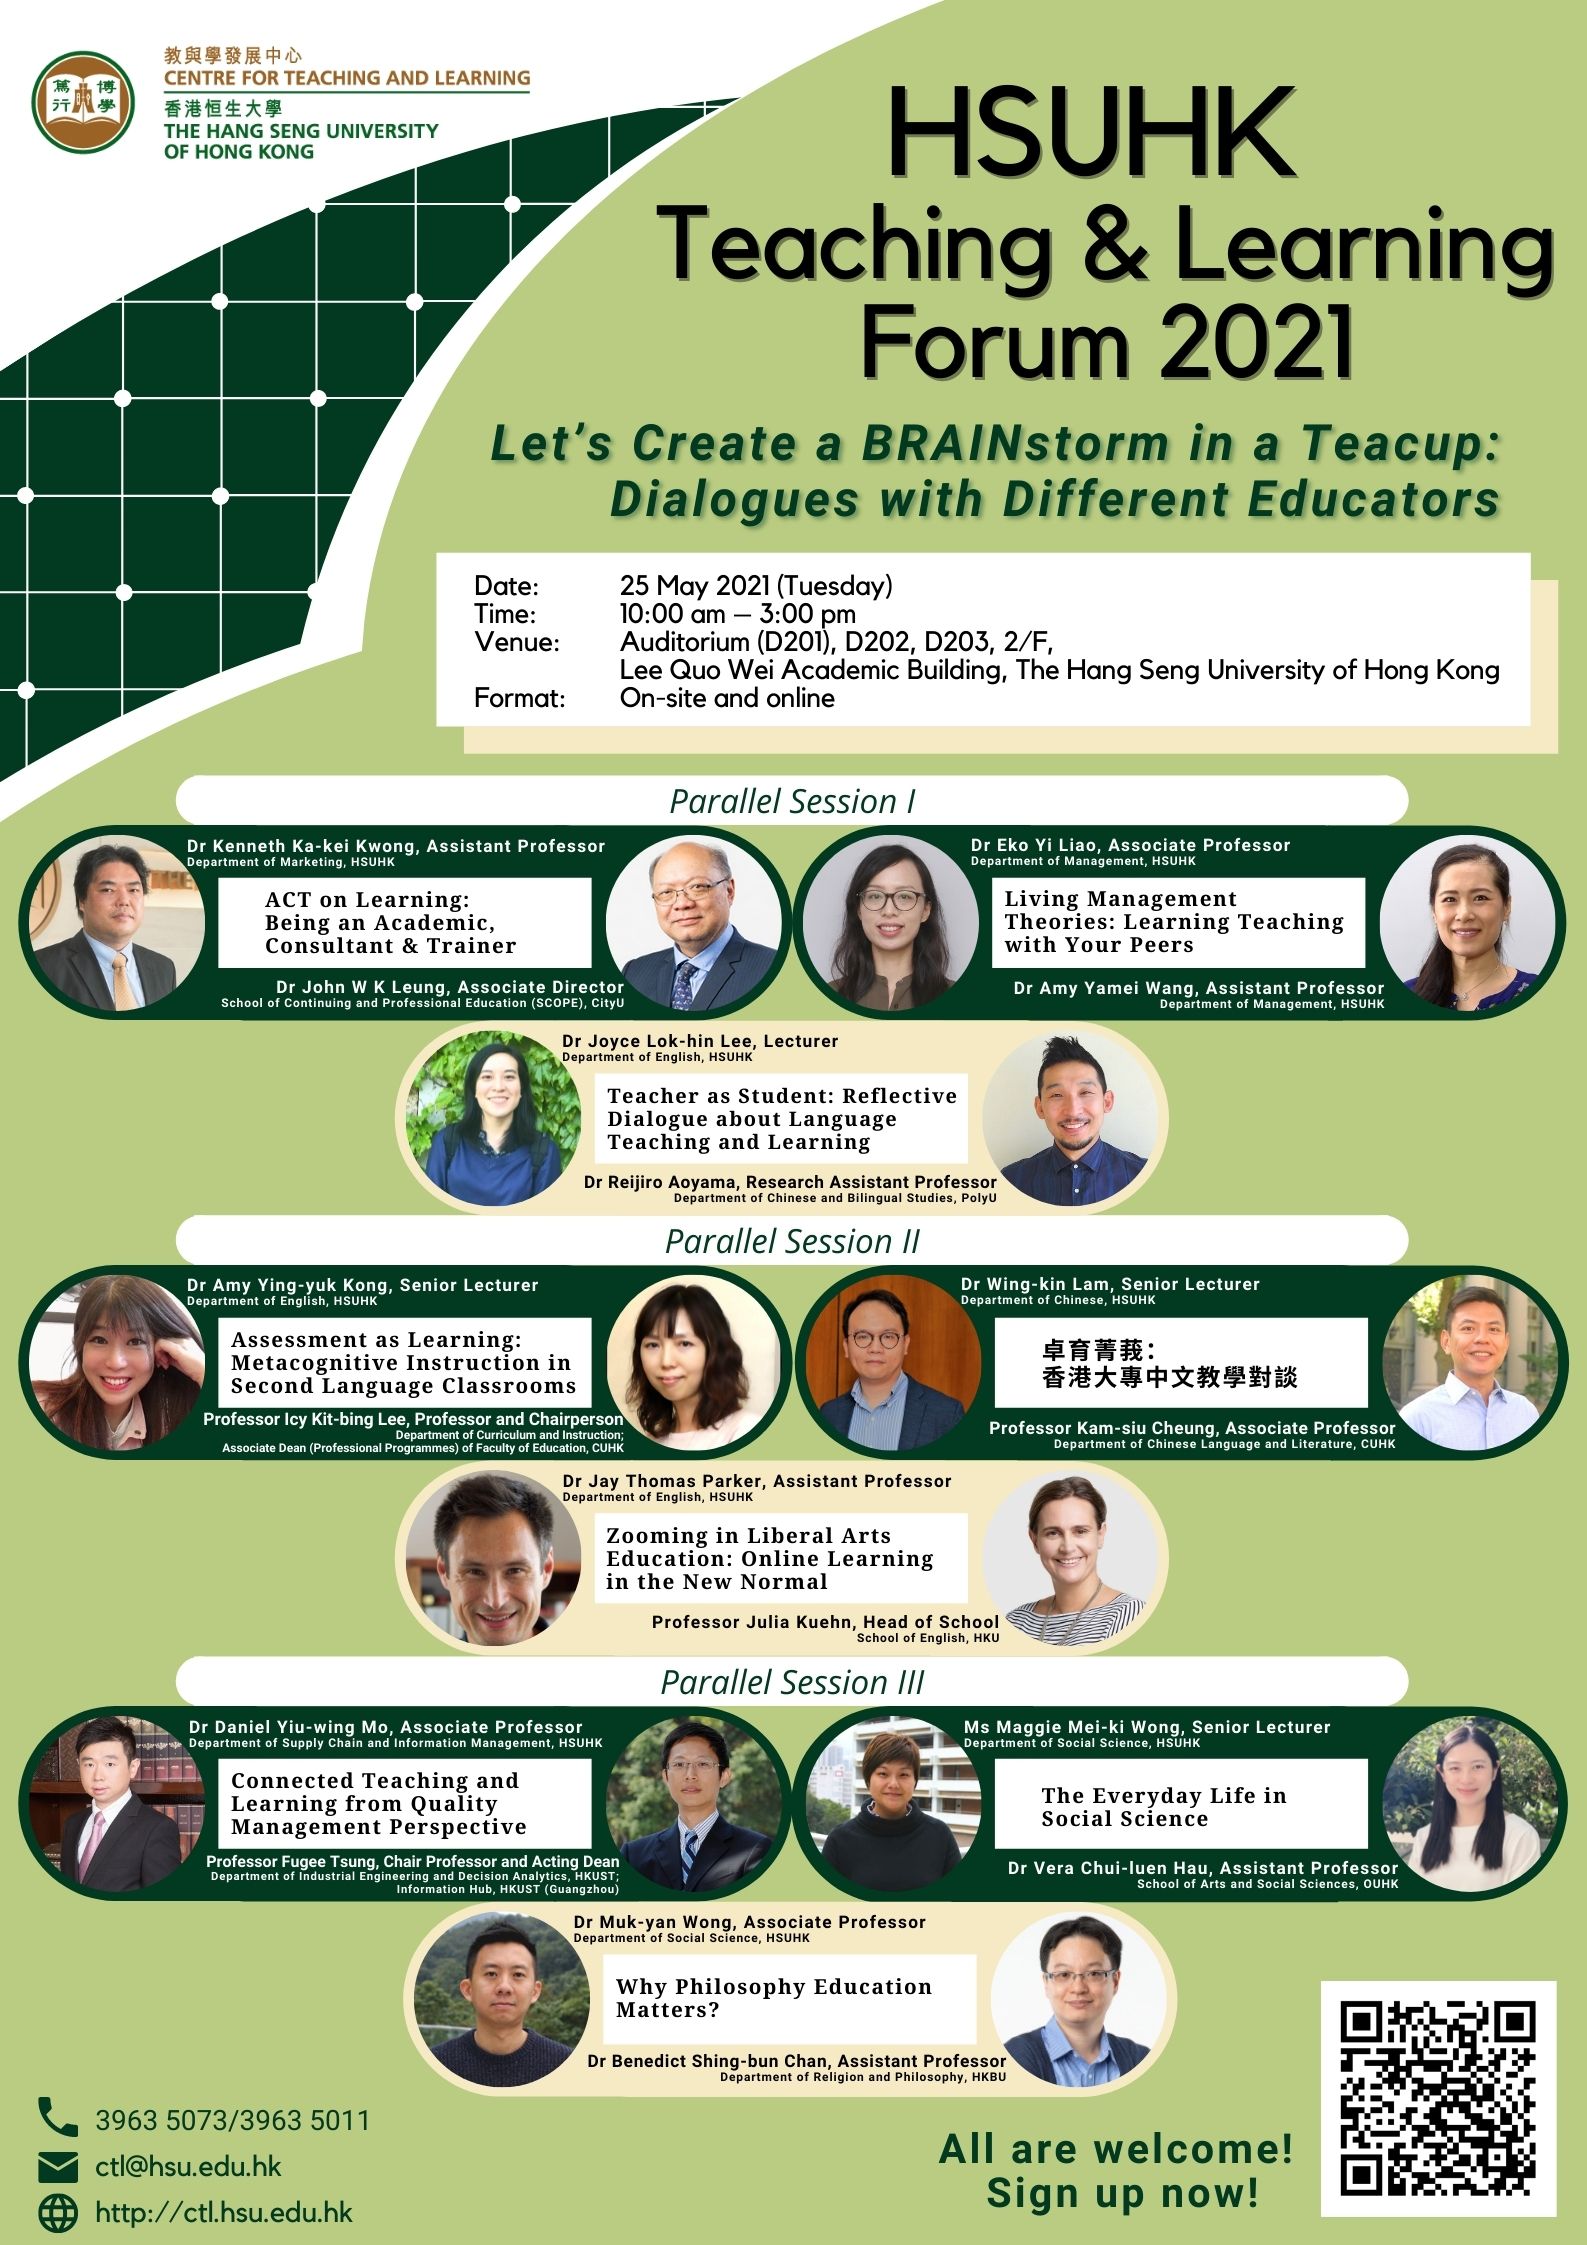 HSUHK Teaching and Learning Forum 2021 Poster